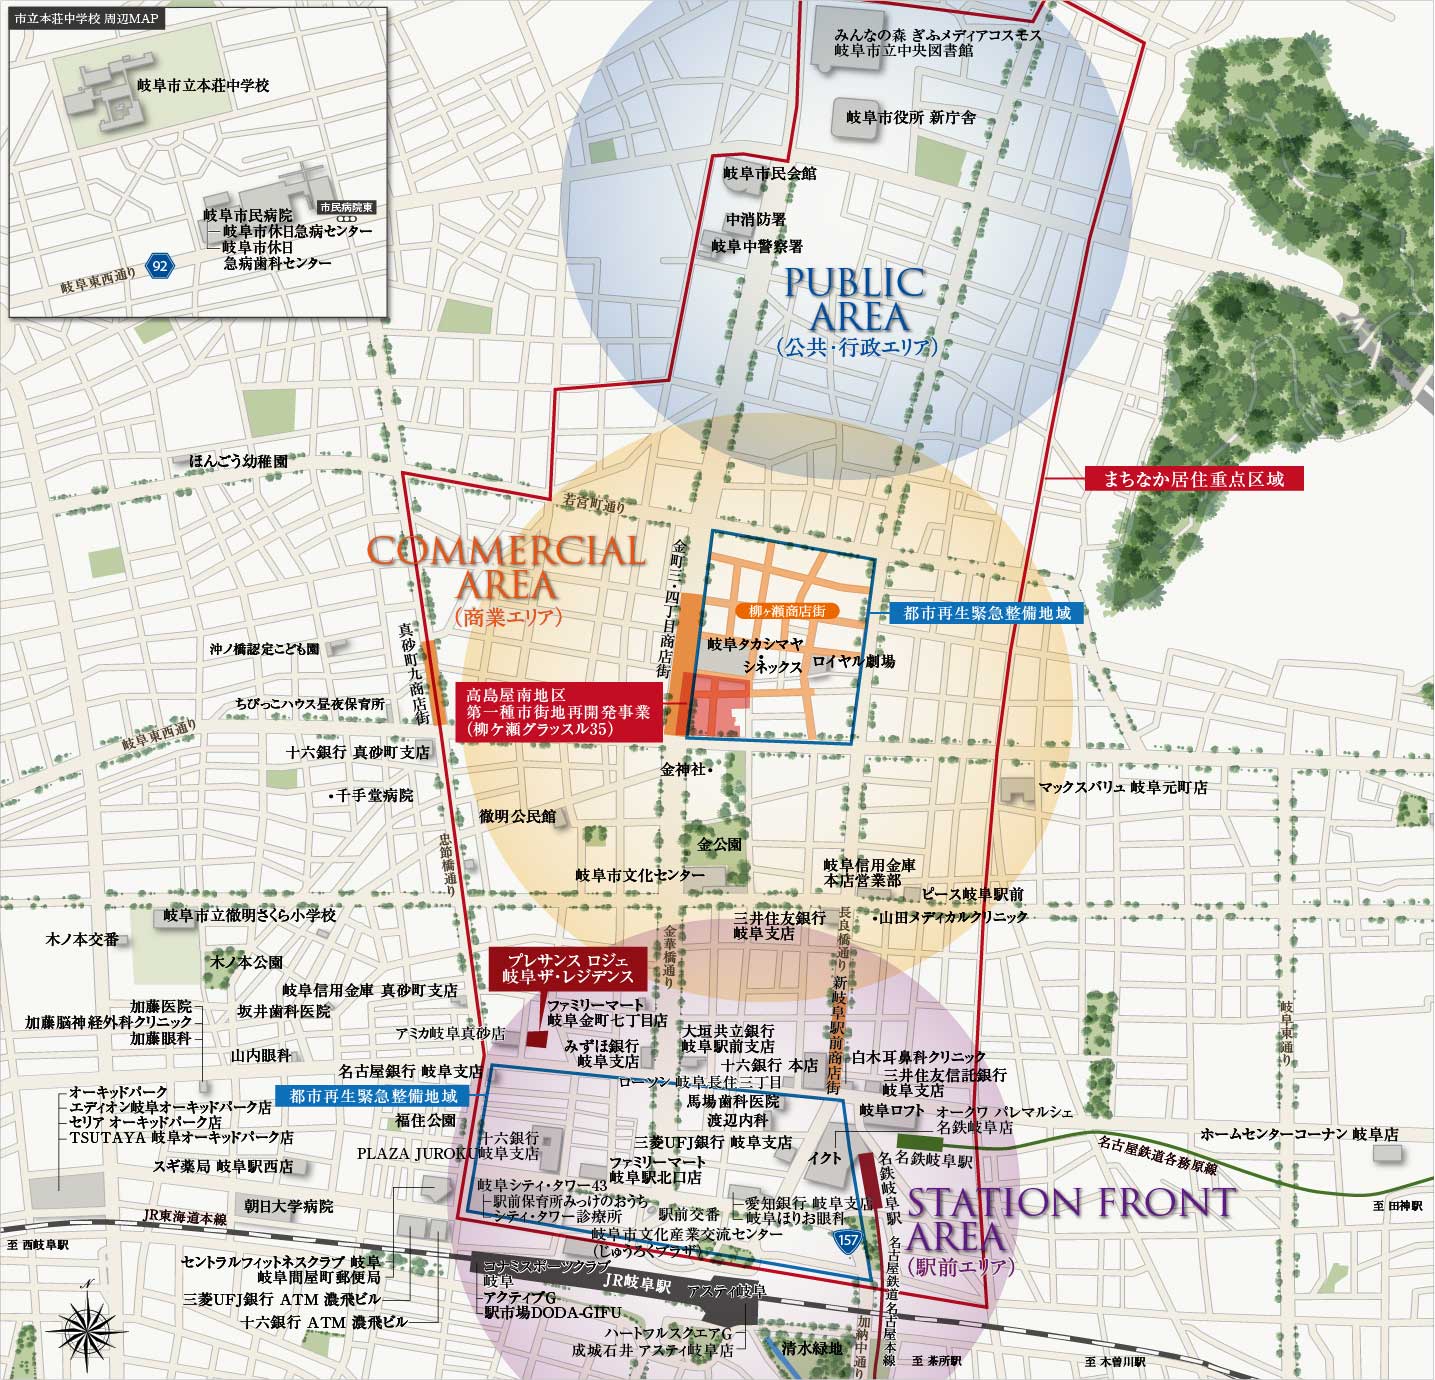 INFORMATION MAP